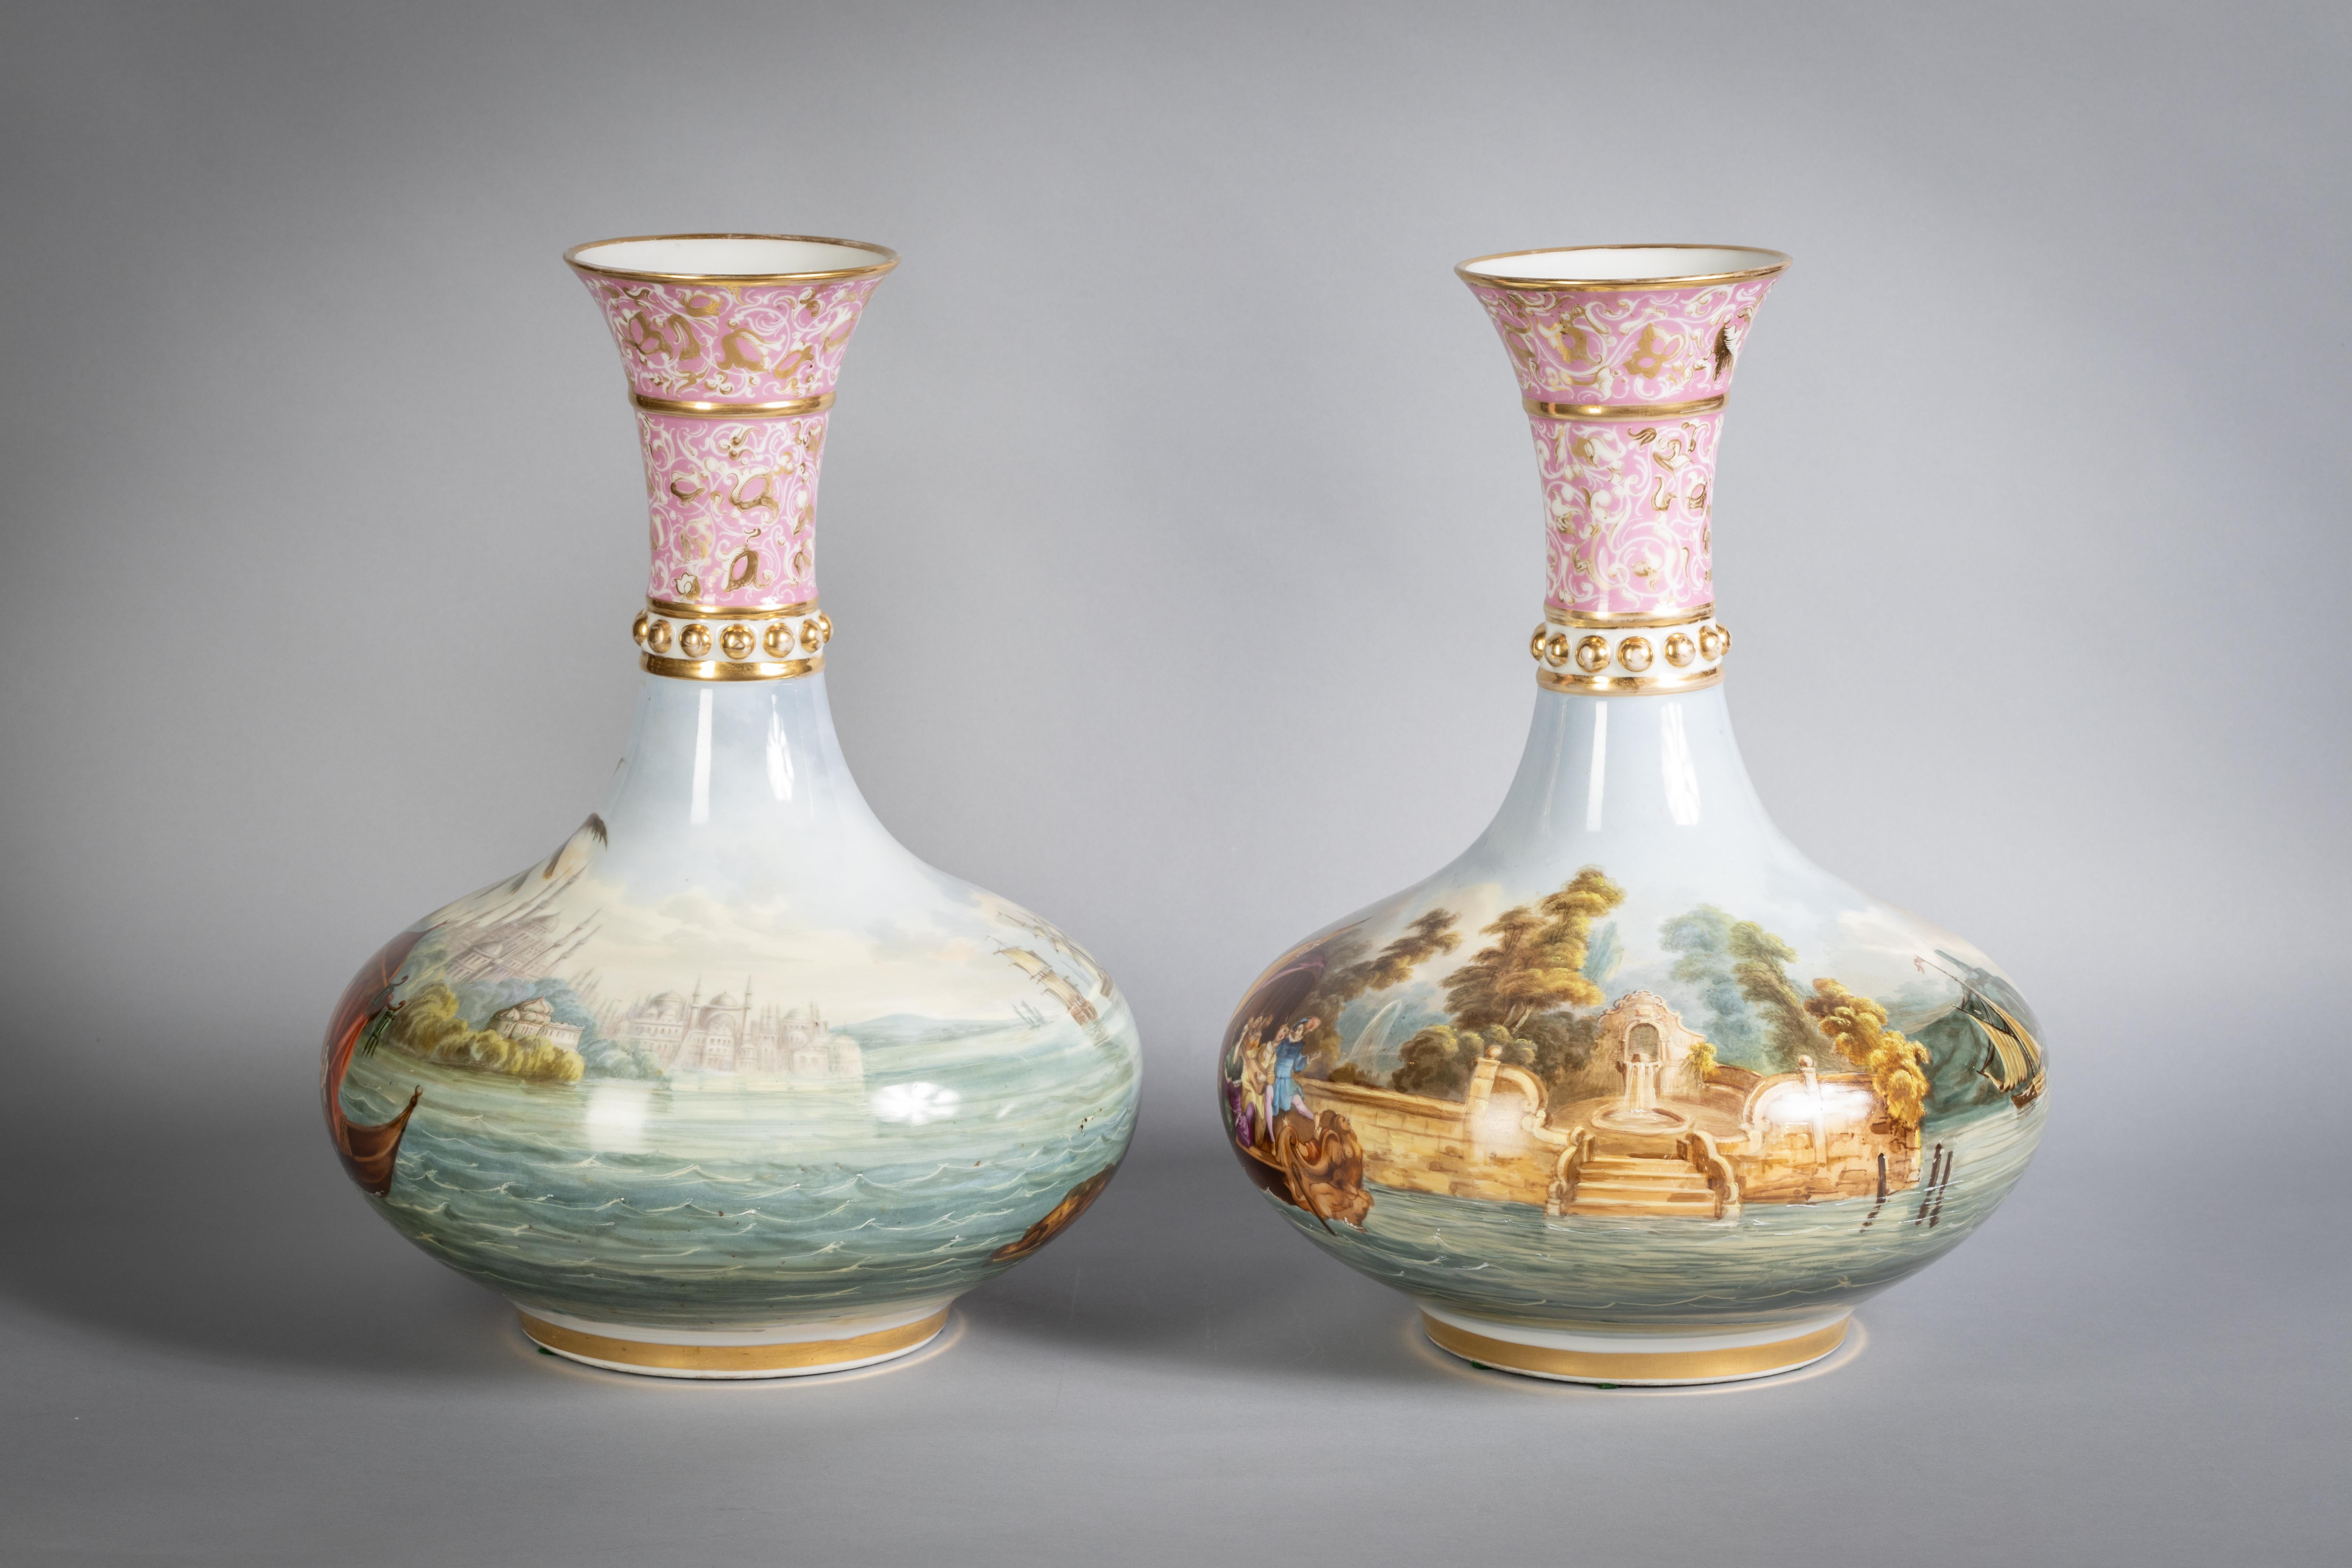 Pair of large and exotic Paris porcelain vases, circa 1840. With exotic figures in riverscapes.